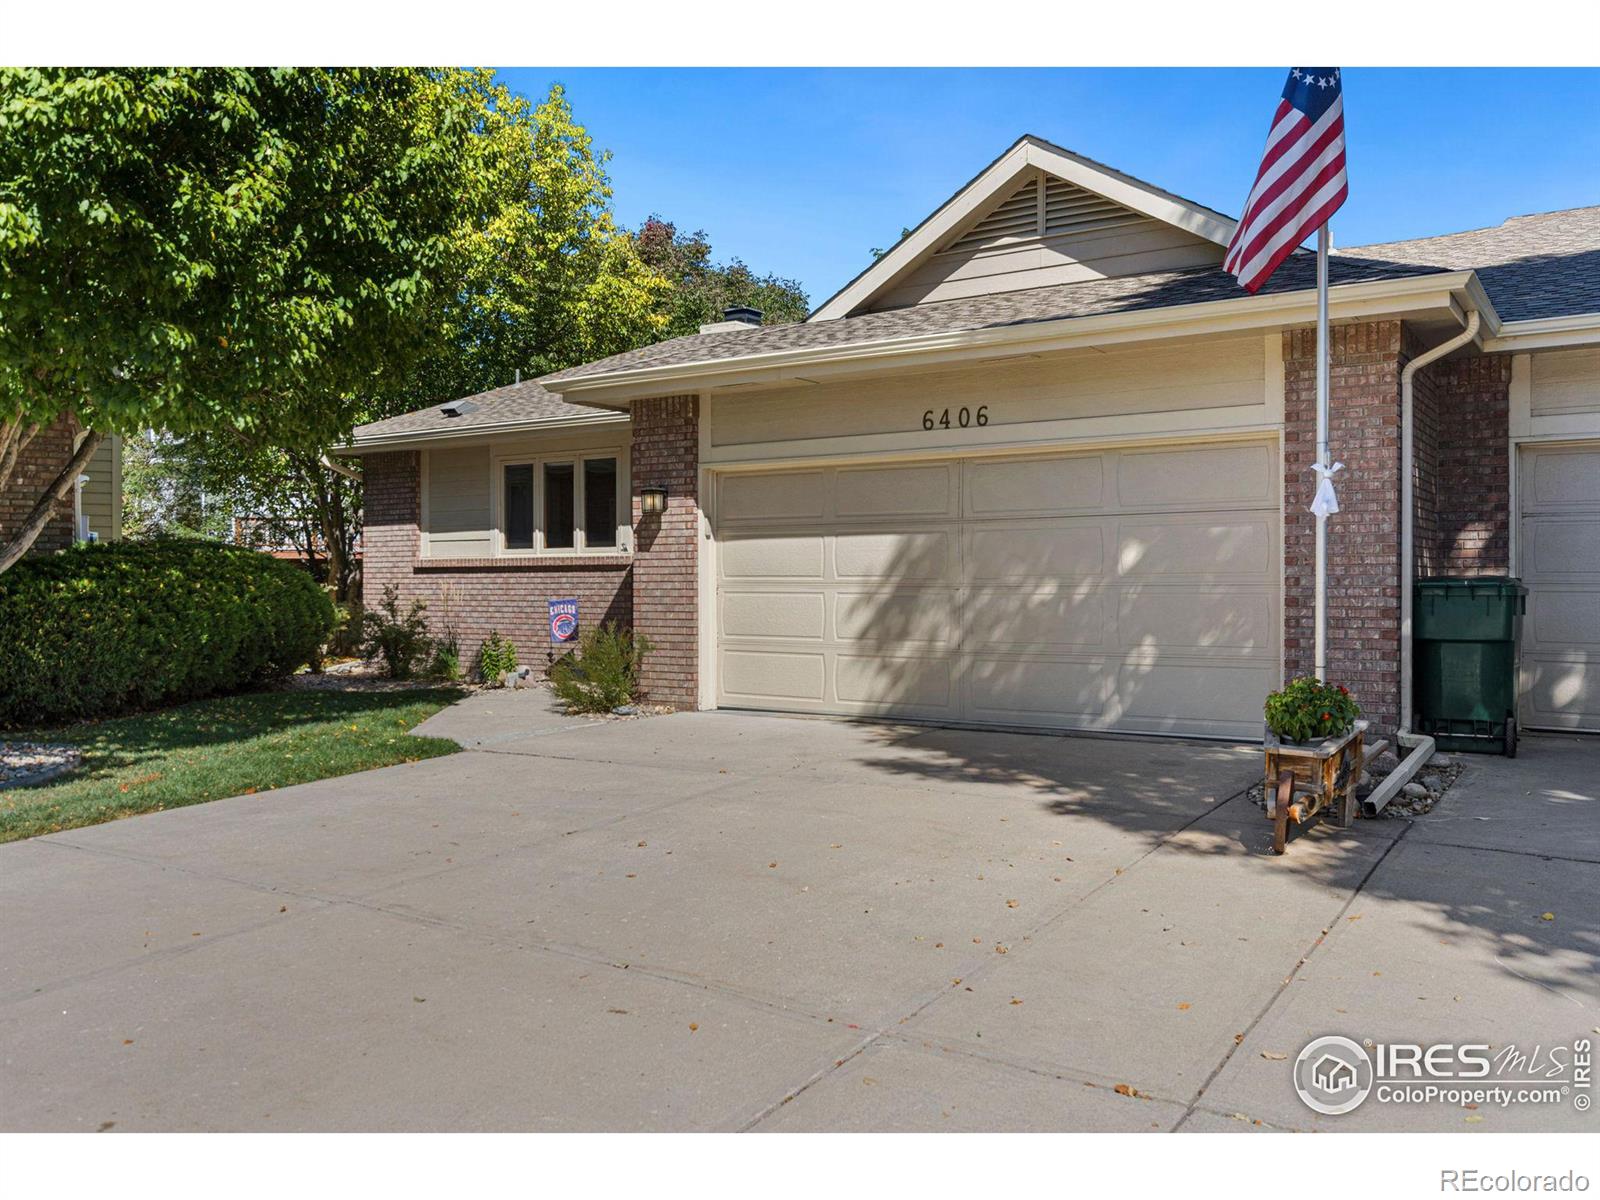 6406  Finch Court, fort collins MLS: 456789997282 Beds: 3 Baths: 3 Price: $549,900